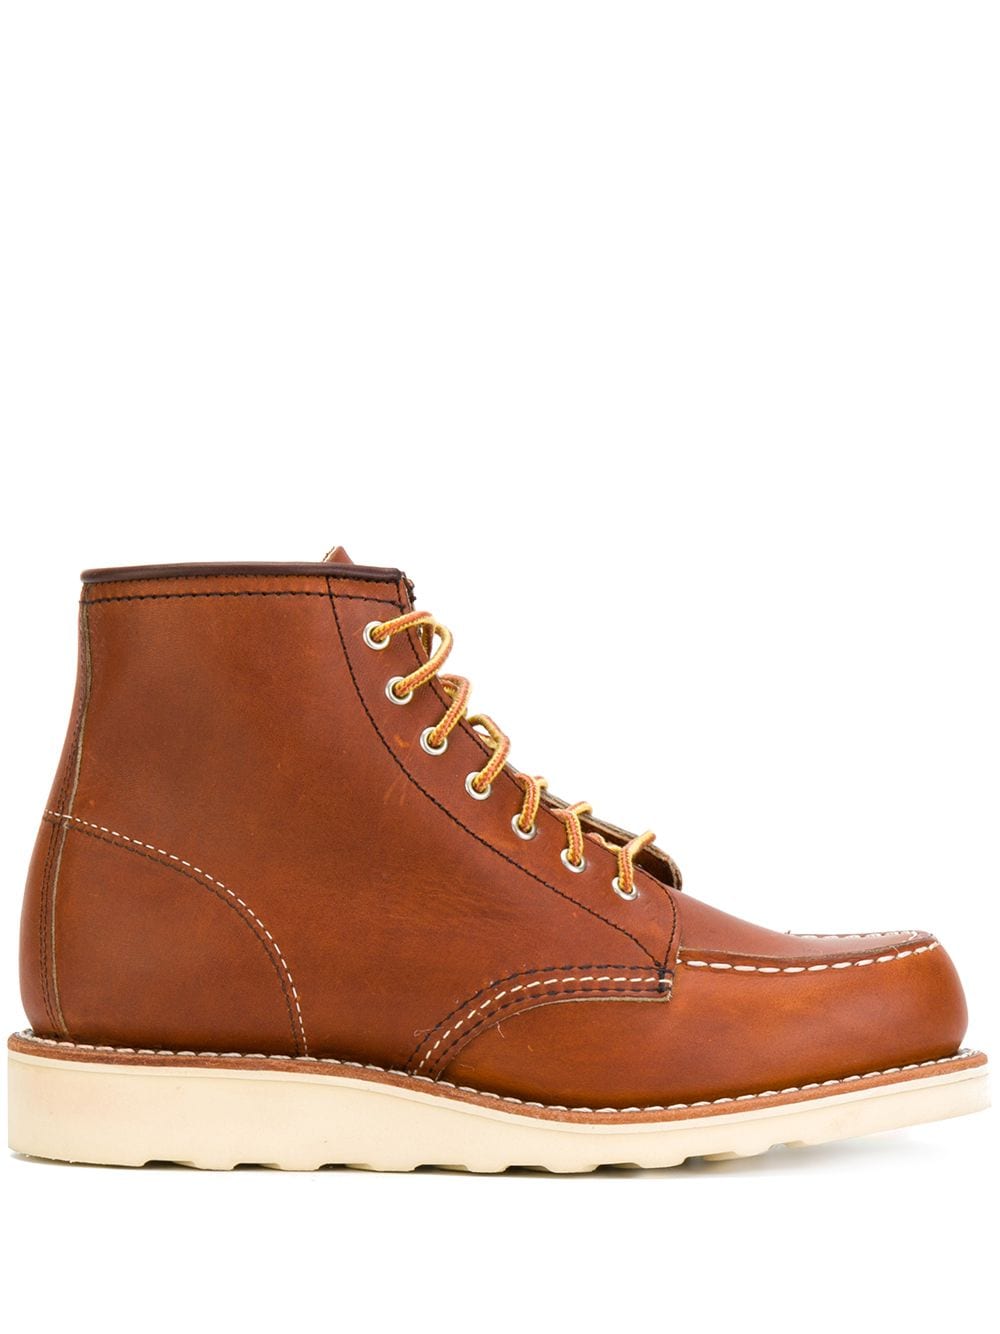 Red Wing Shoes lace-up loafer boots - Brown von Red Wing Shoes